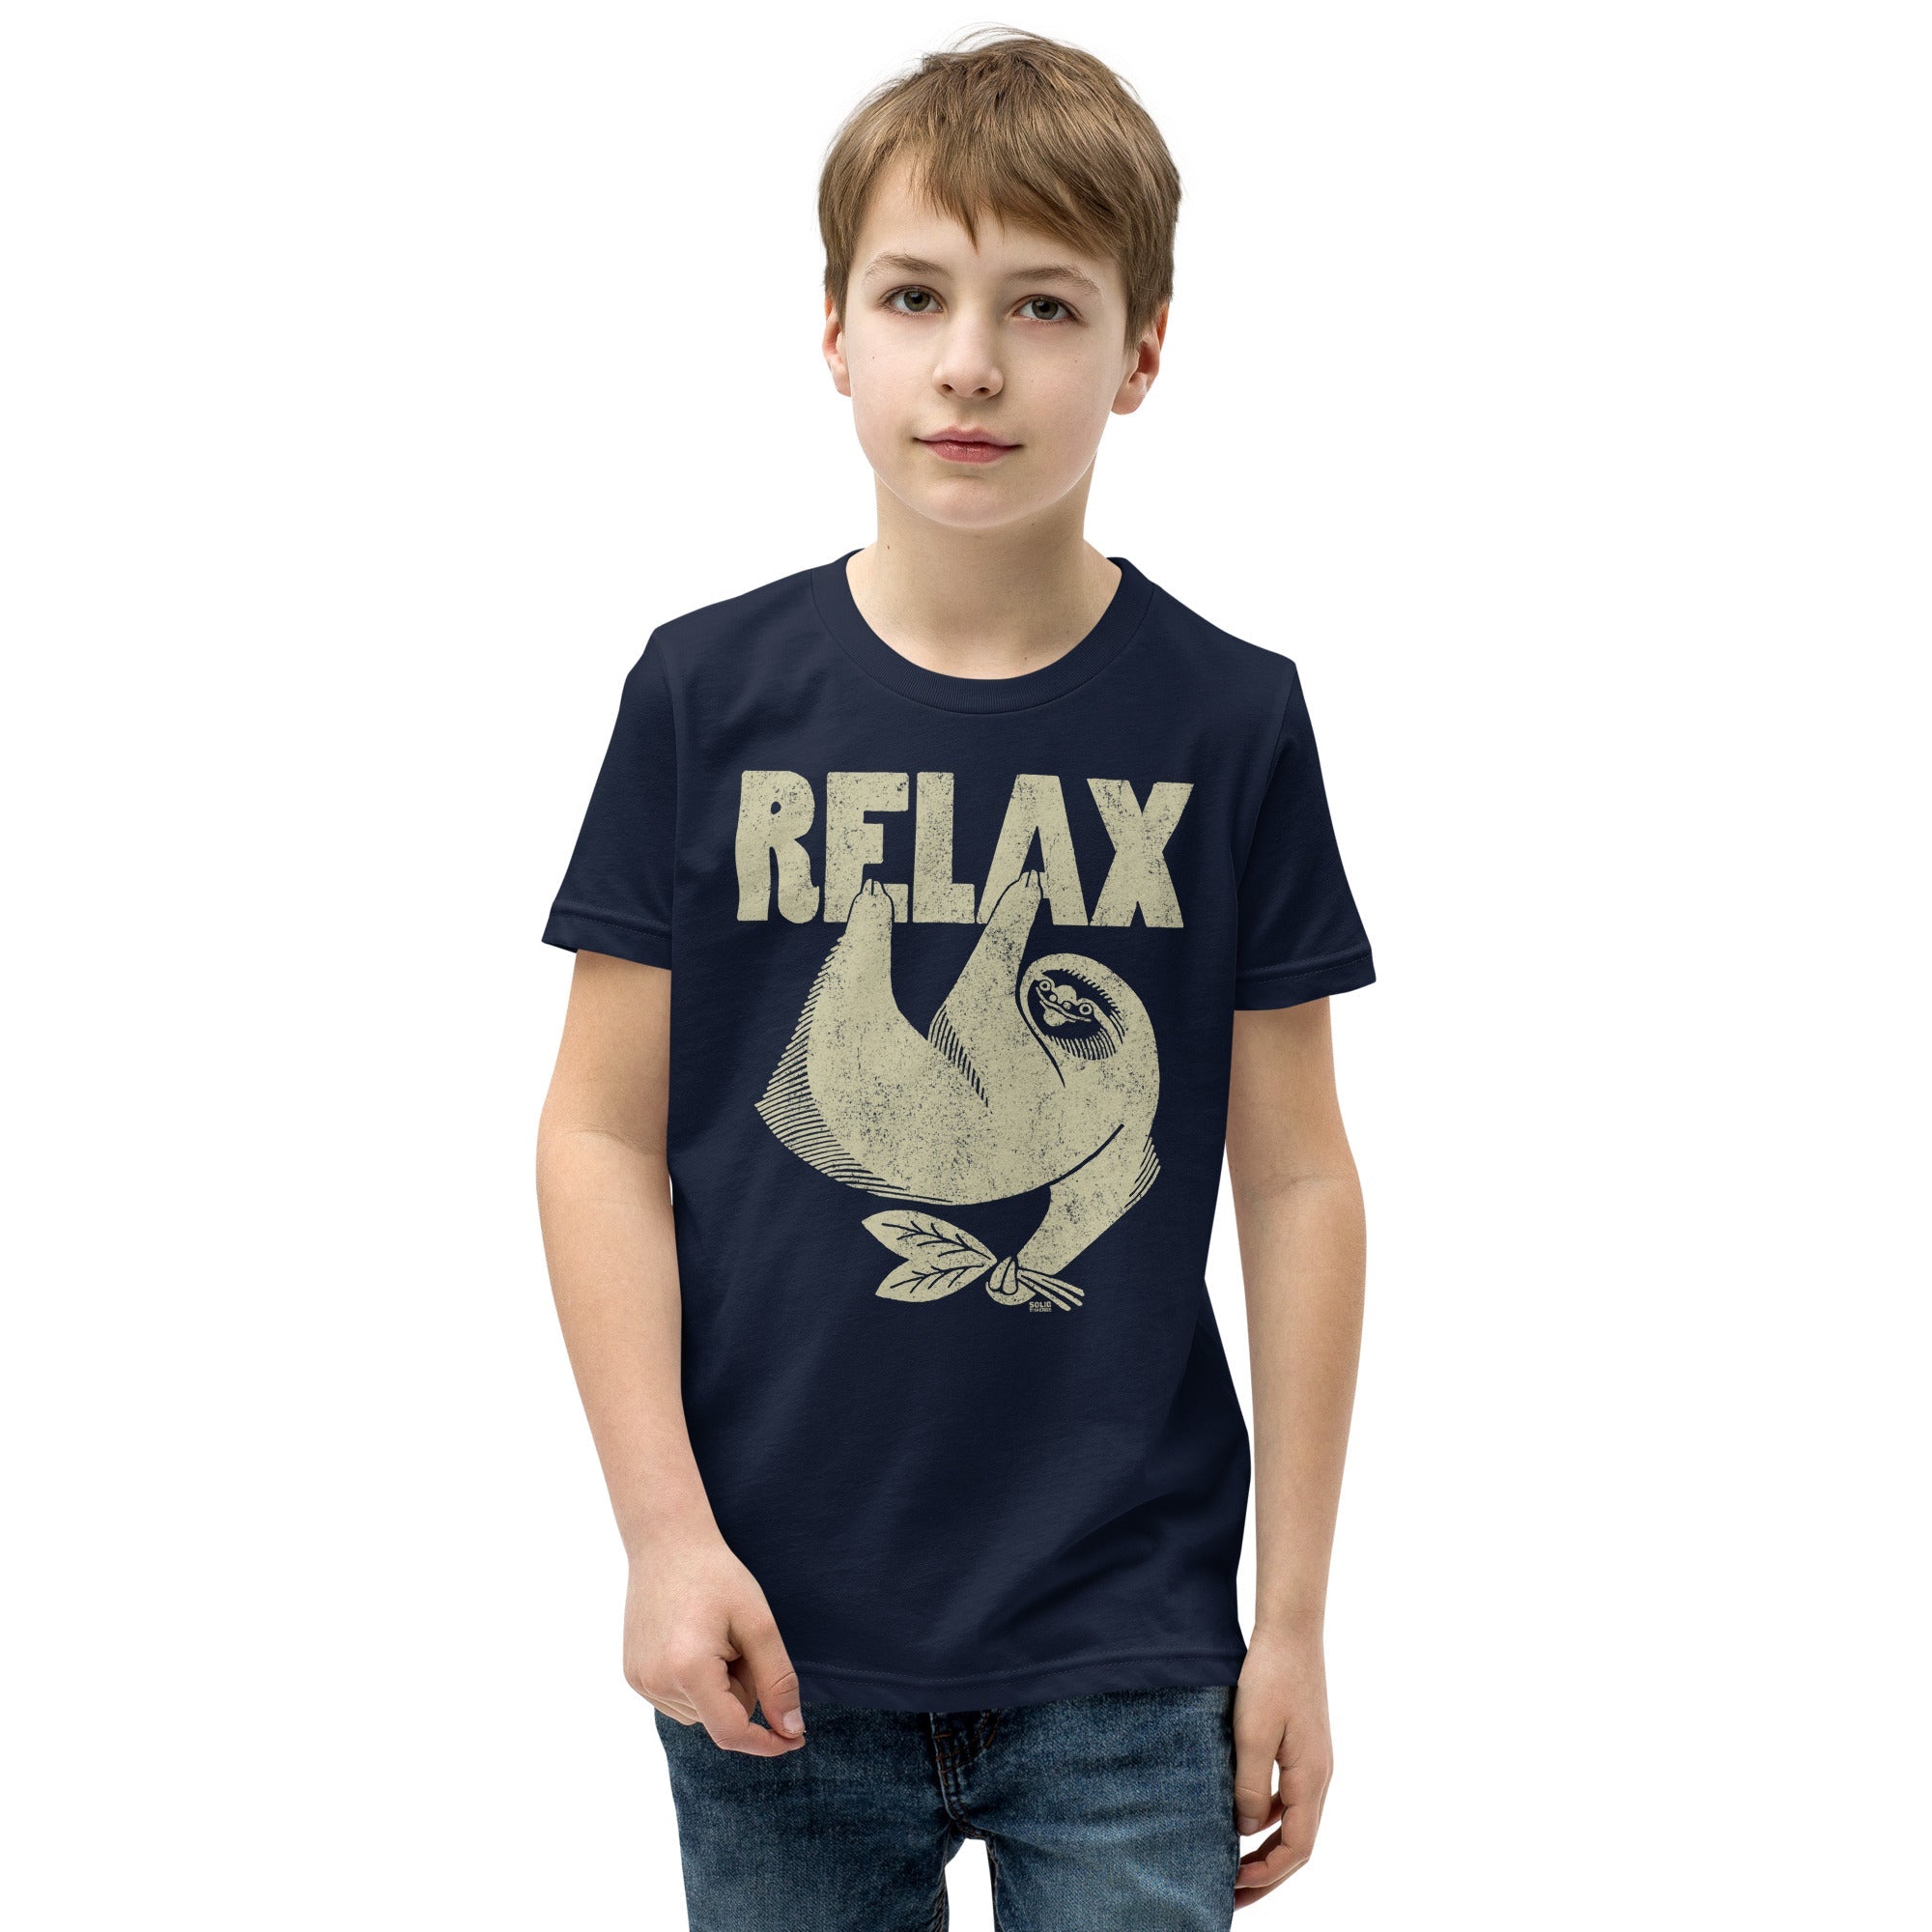 Youth Relax Retro Cute Sloth Extra Soft T-Shirt | Funny Animal Kids Tee Boy Model | Solid Threads